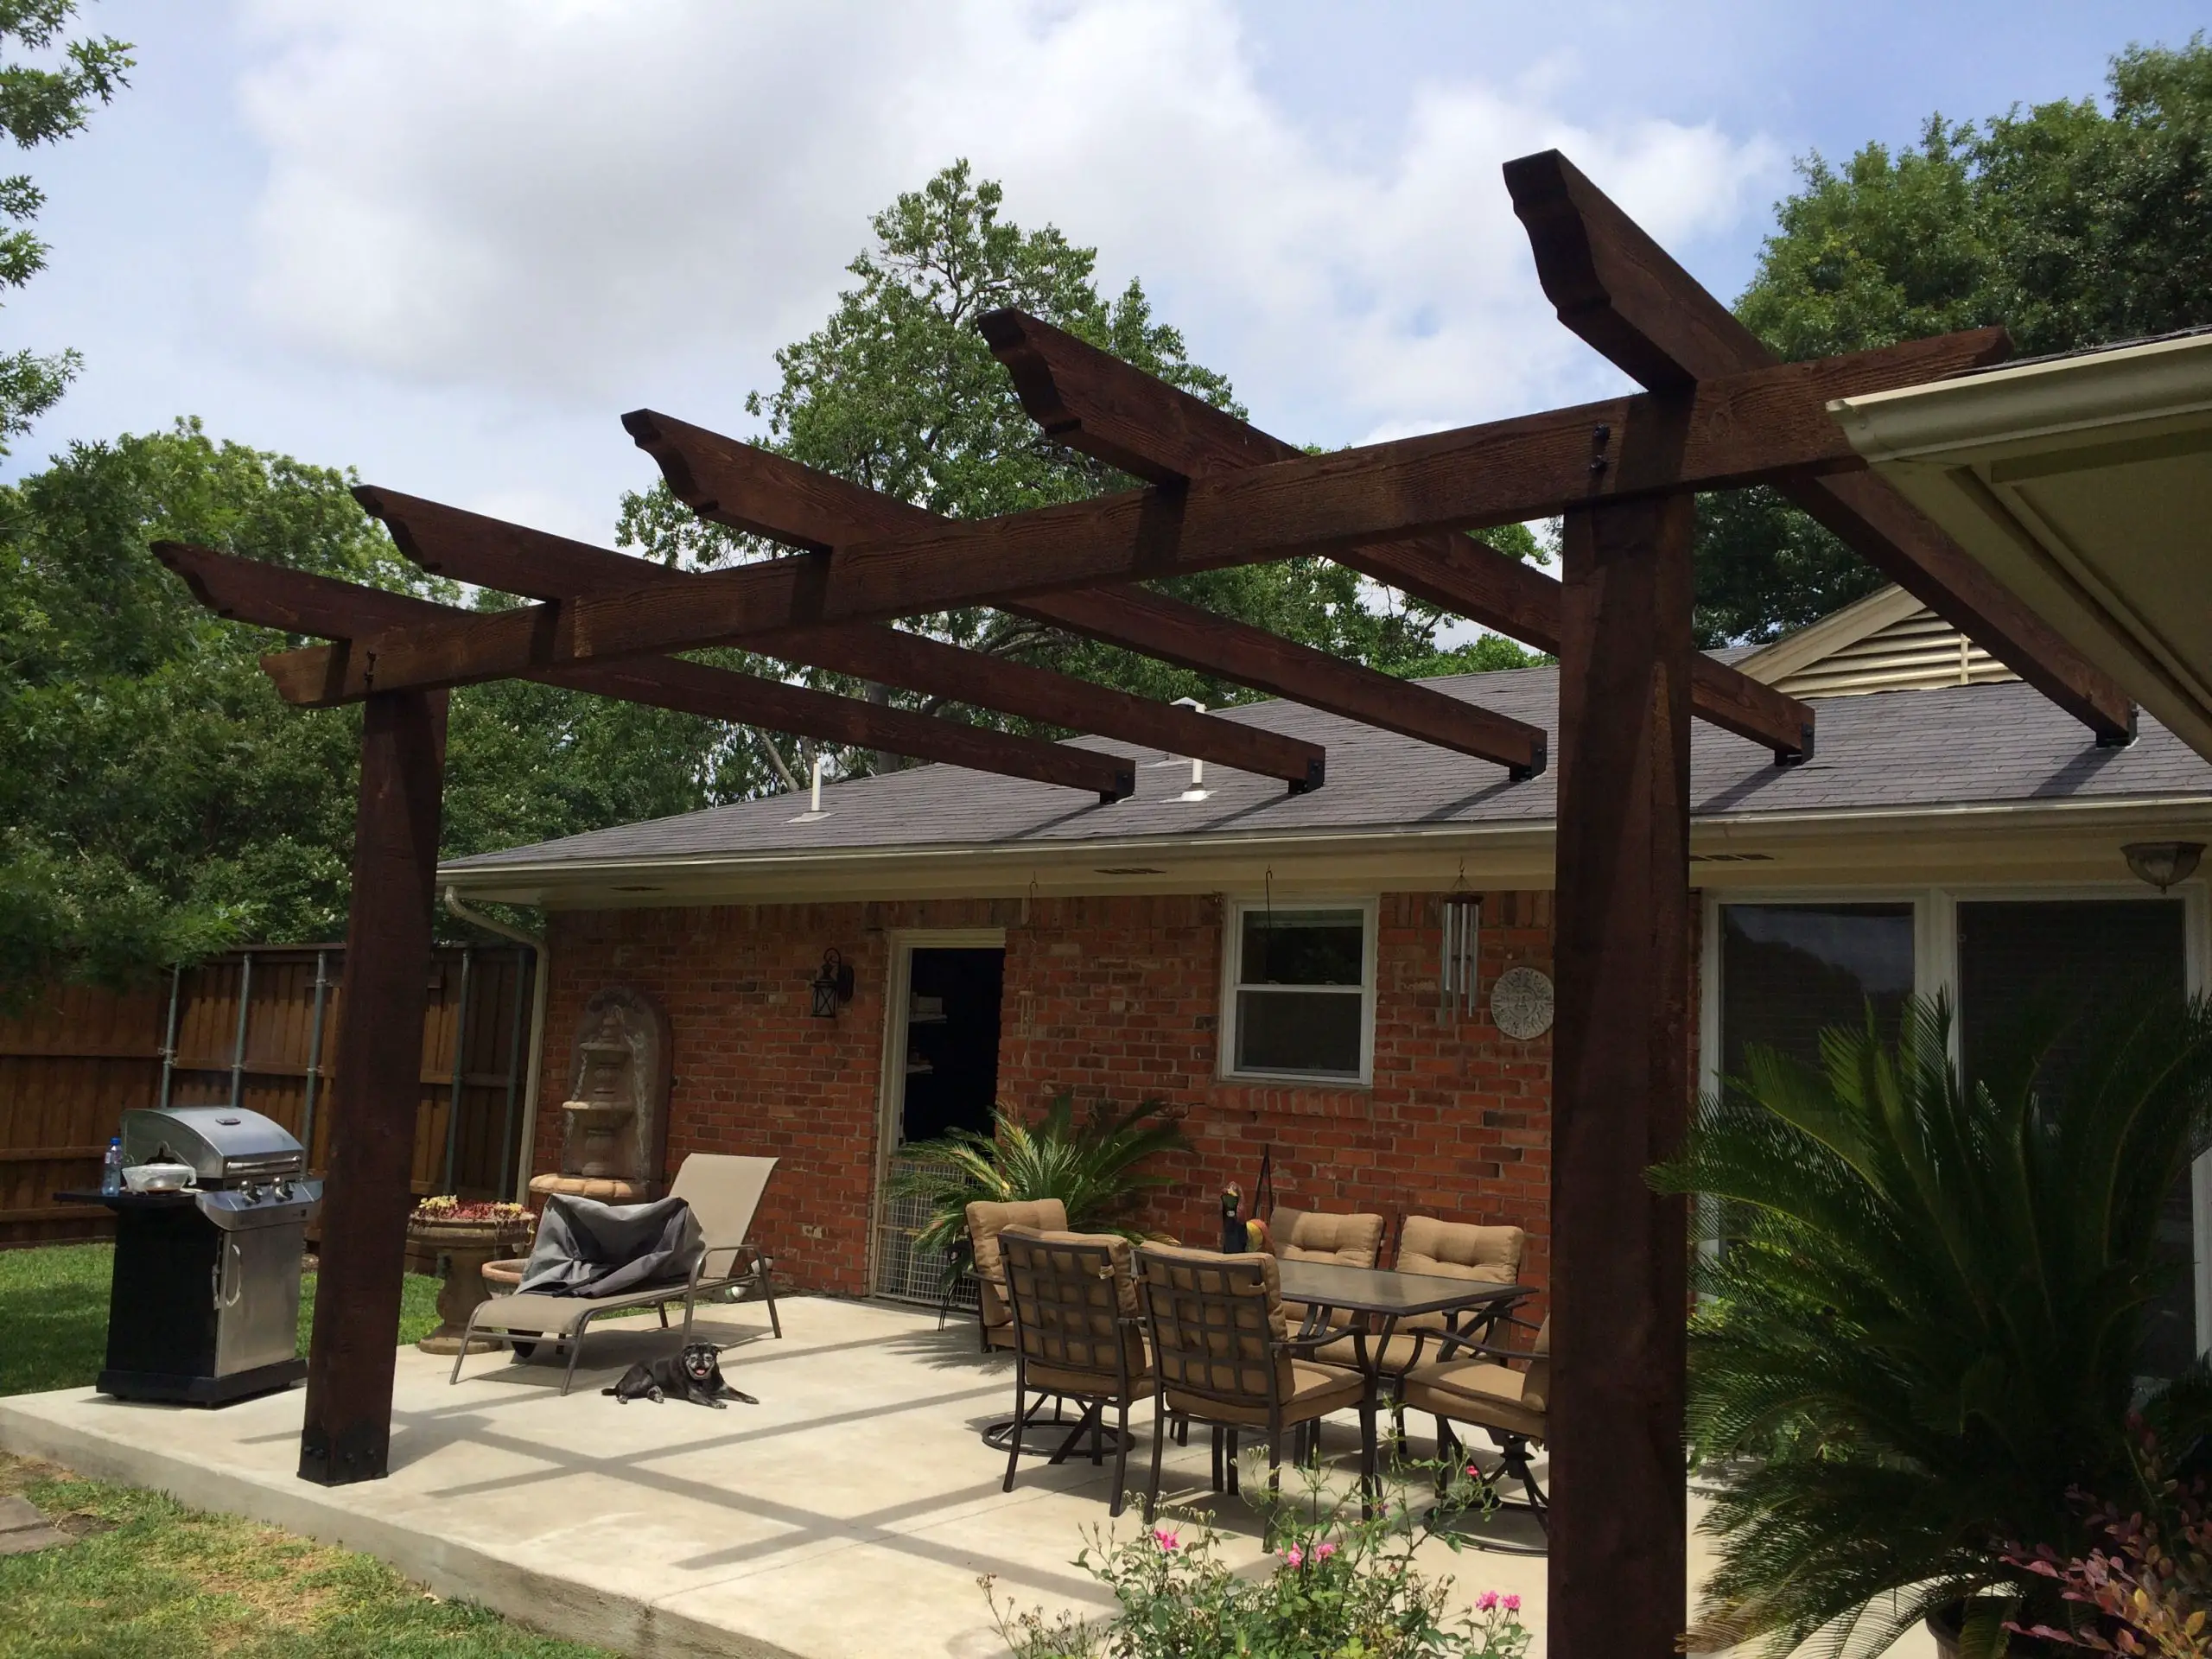 Pergola attached to roof.